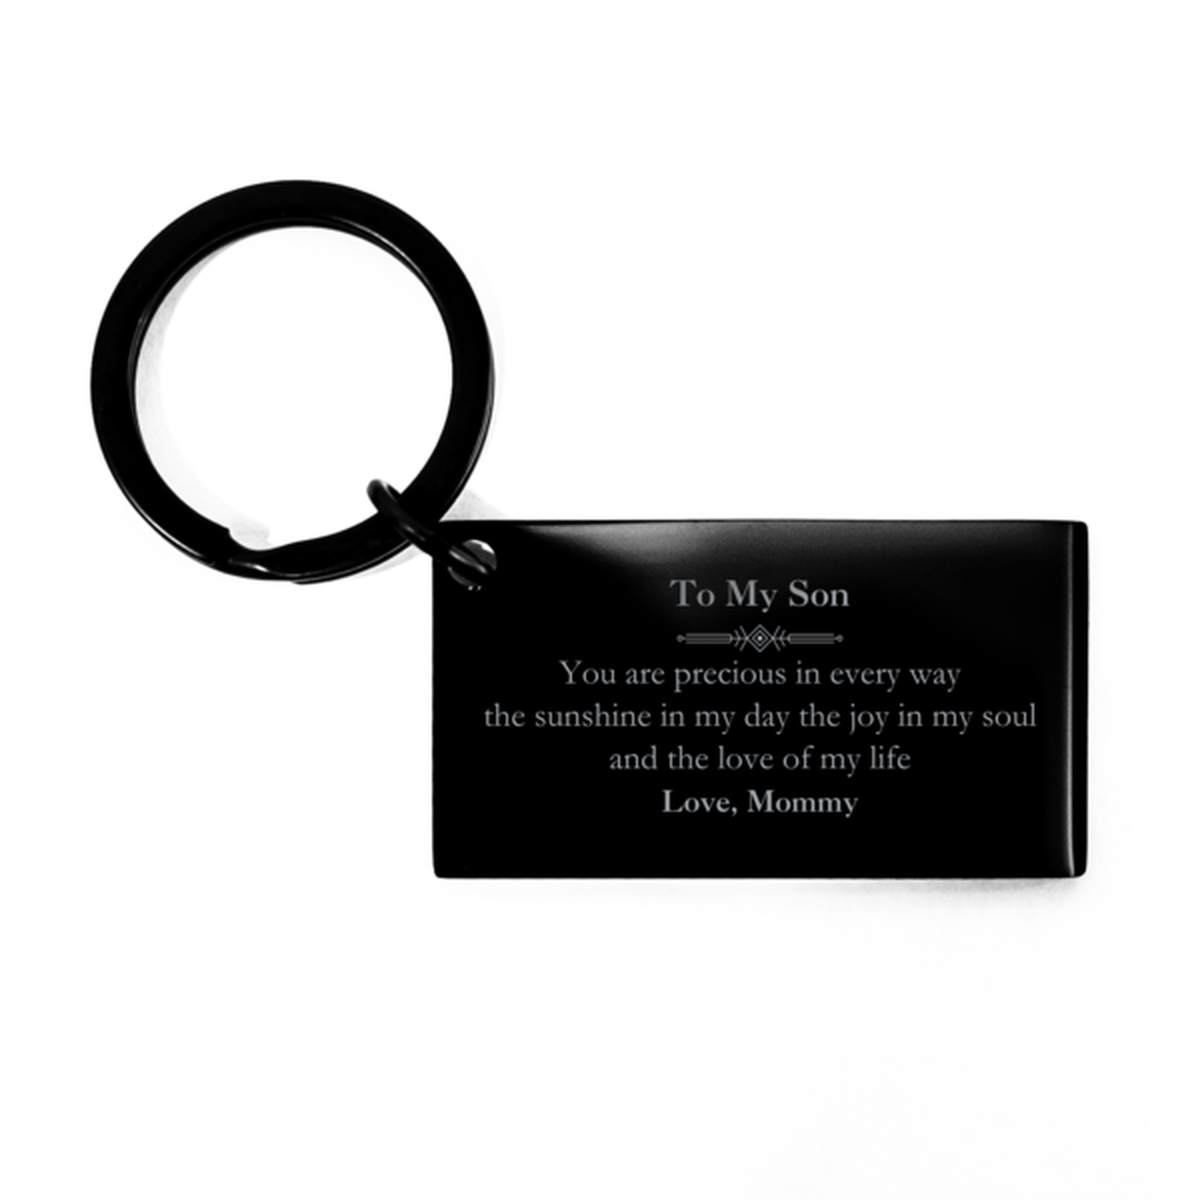 Graduation Gifts for Son Keychain Present from Mommy, Christmas Son Birthday Gifts Son You are precious in every way the sunshine in my day. Love, Mommy